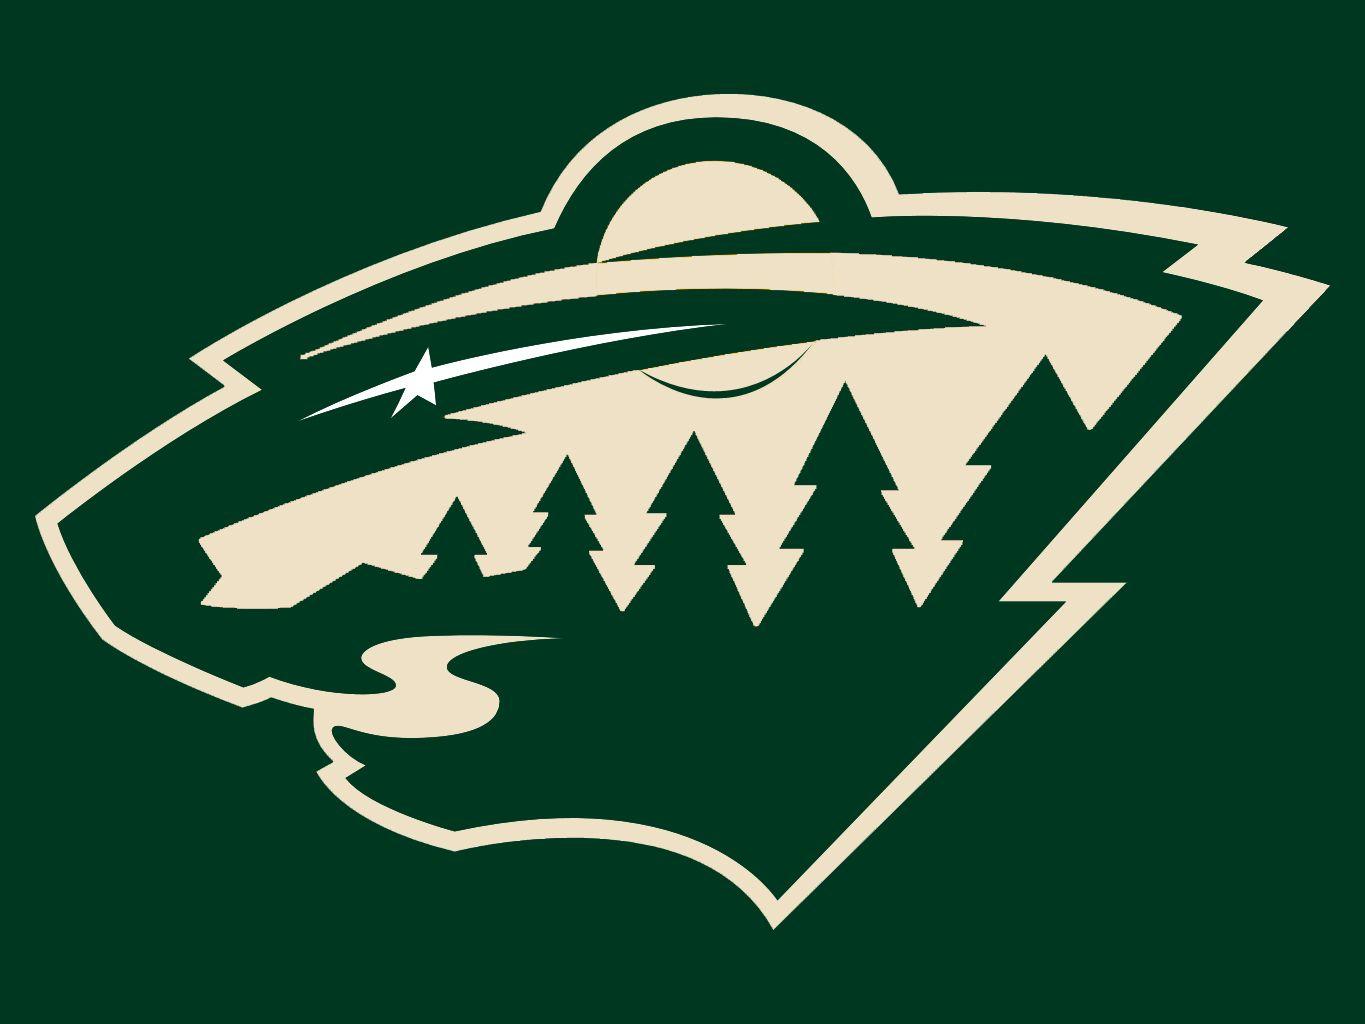 Wild Logo - Now I know I've seen people post Minnesota Wild Logos with Northstar